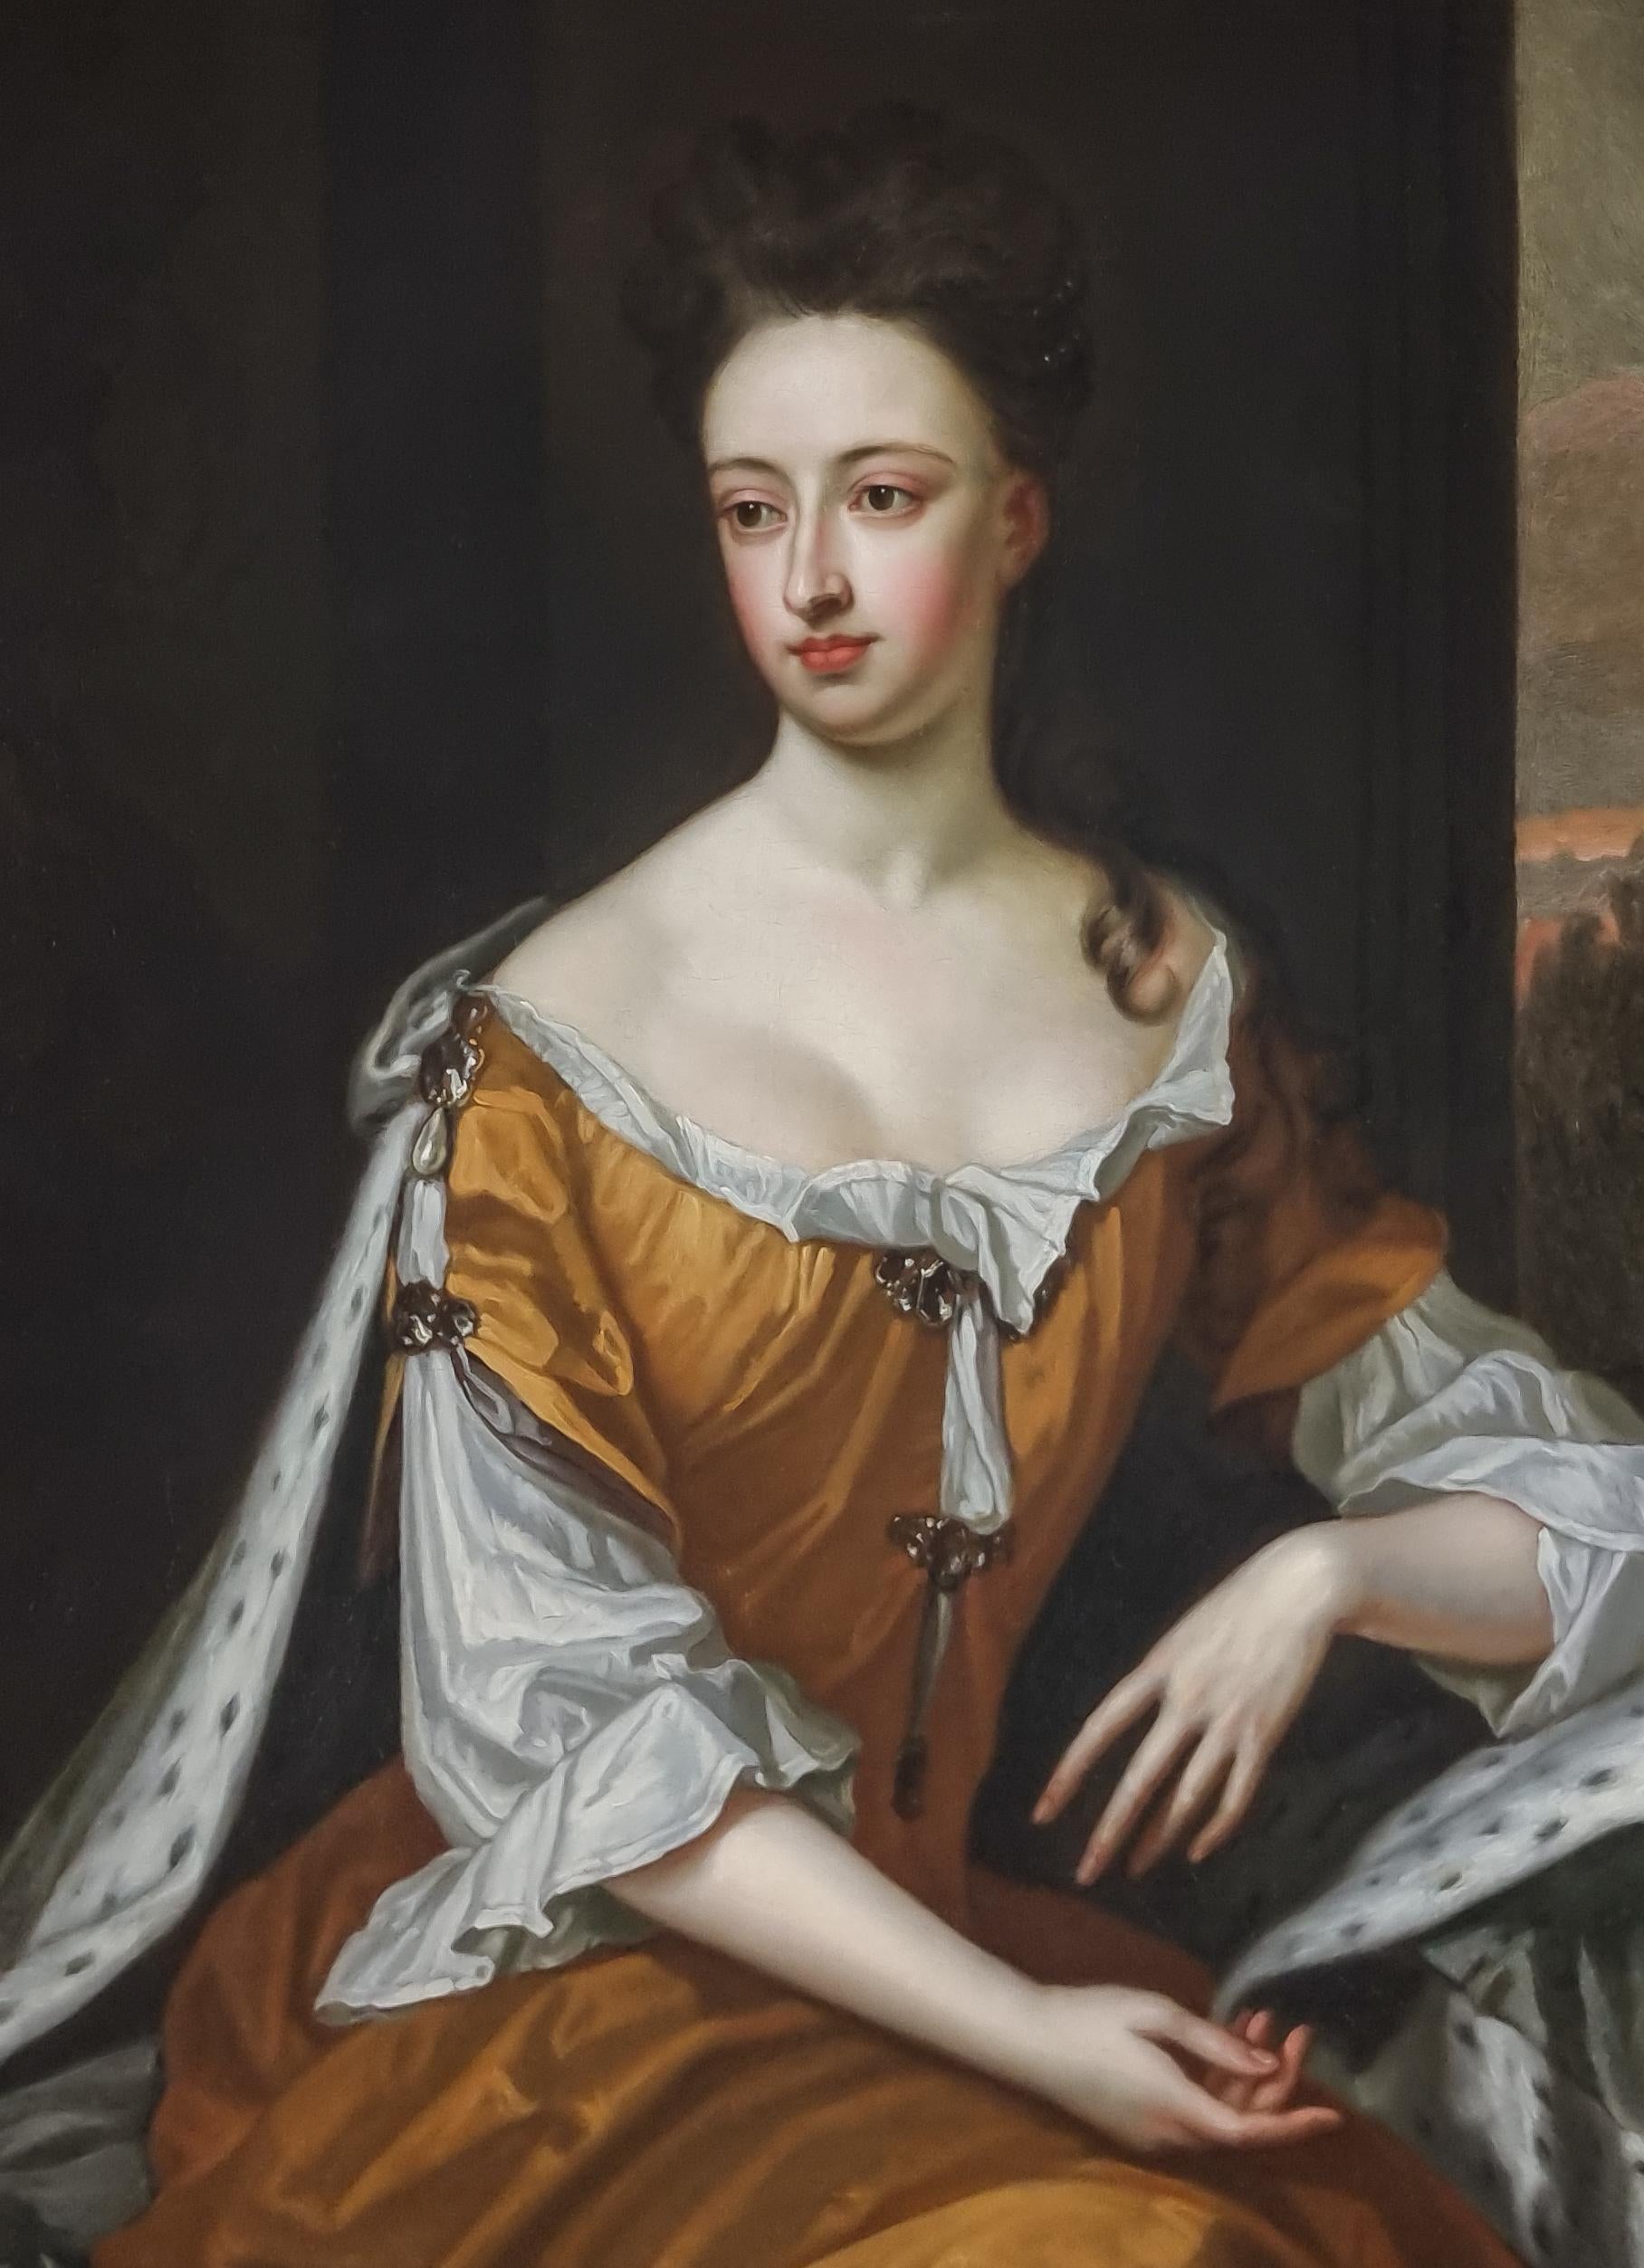 Portrait of Lady, Mary Sackville, Countess of Dorset, Studio of Godfrey Kneller - Old Masters Painting by studio of Sir Godfrey Kneller